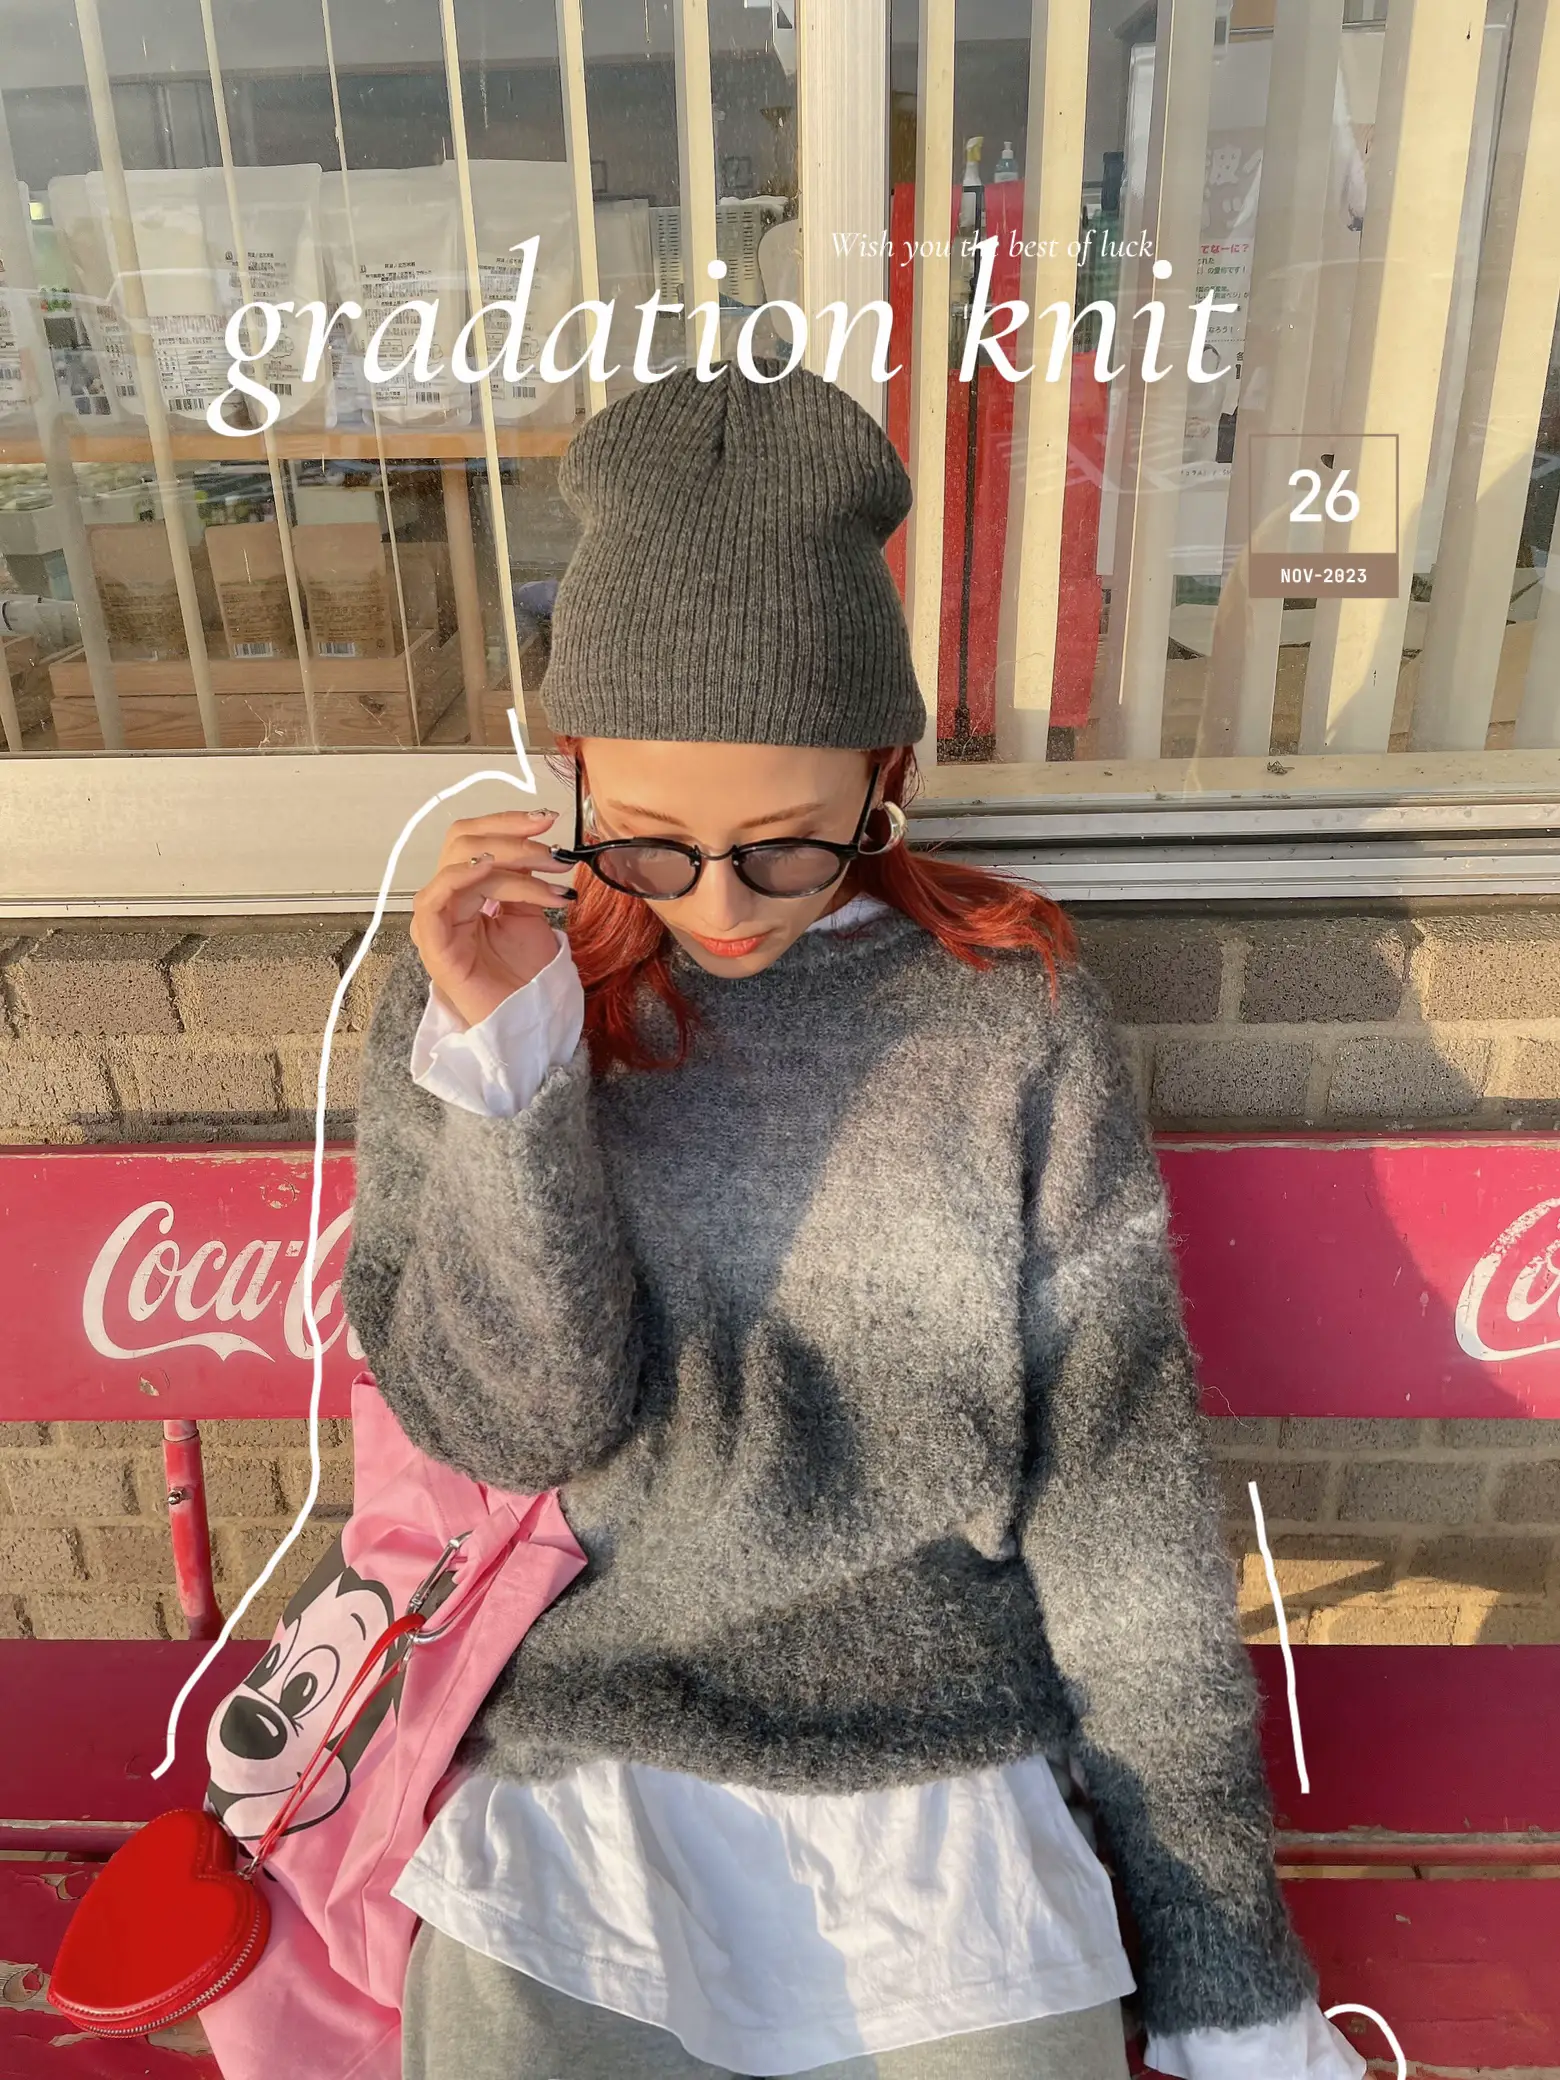 Gradation Knit for a modern look📸✨ | Gallery posted by